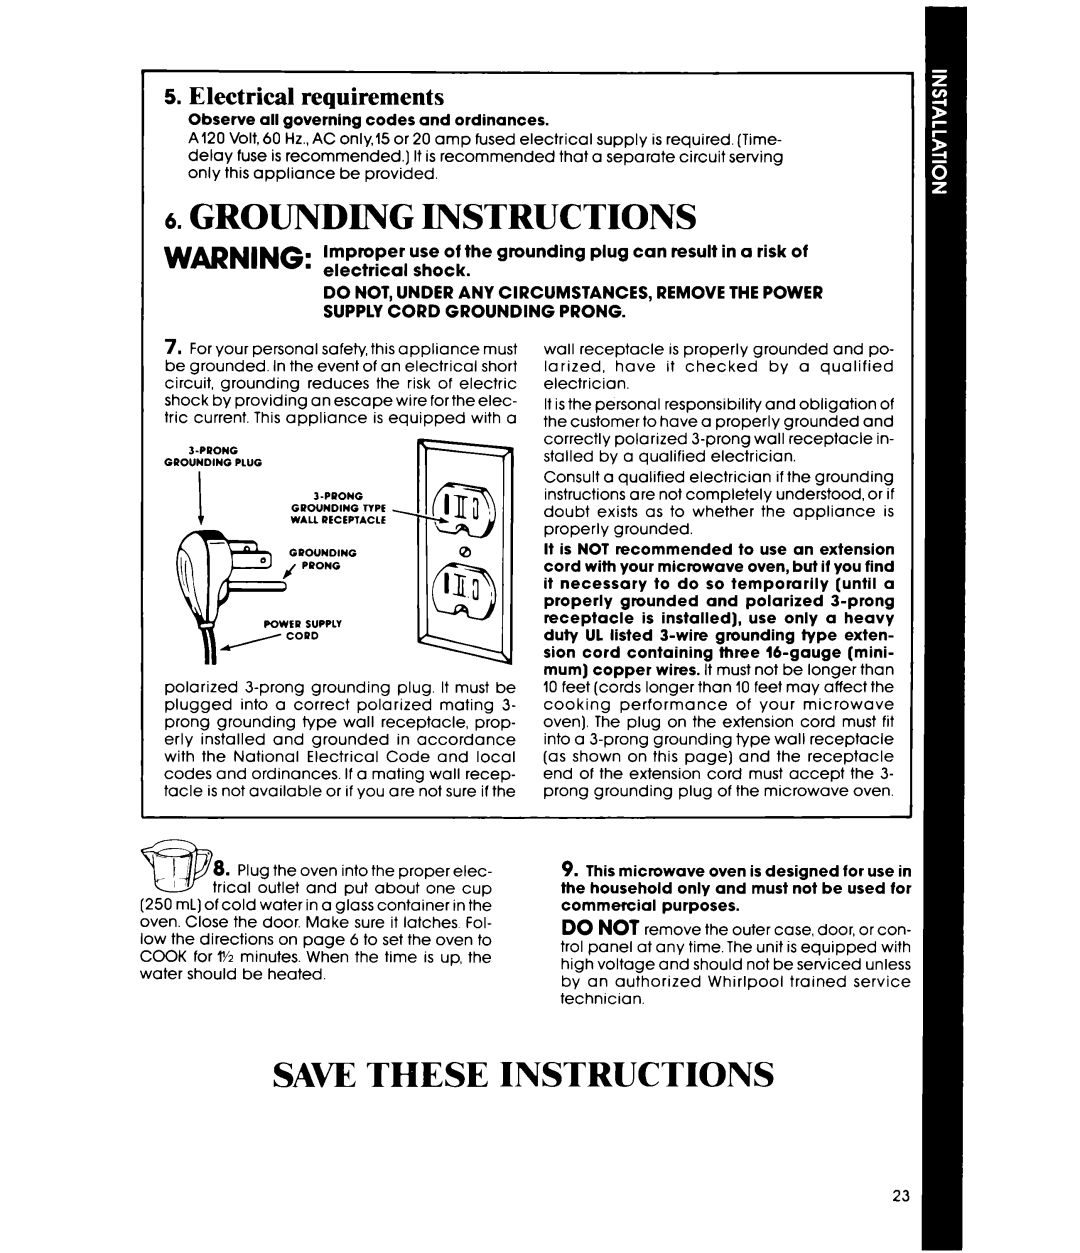 Whirlpool MW865EXR, MW8600XR, MW8650XR manual Grounding Instructions, Save These Instructions, Electrical requirements 